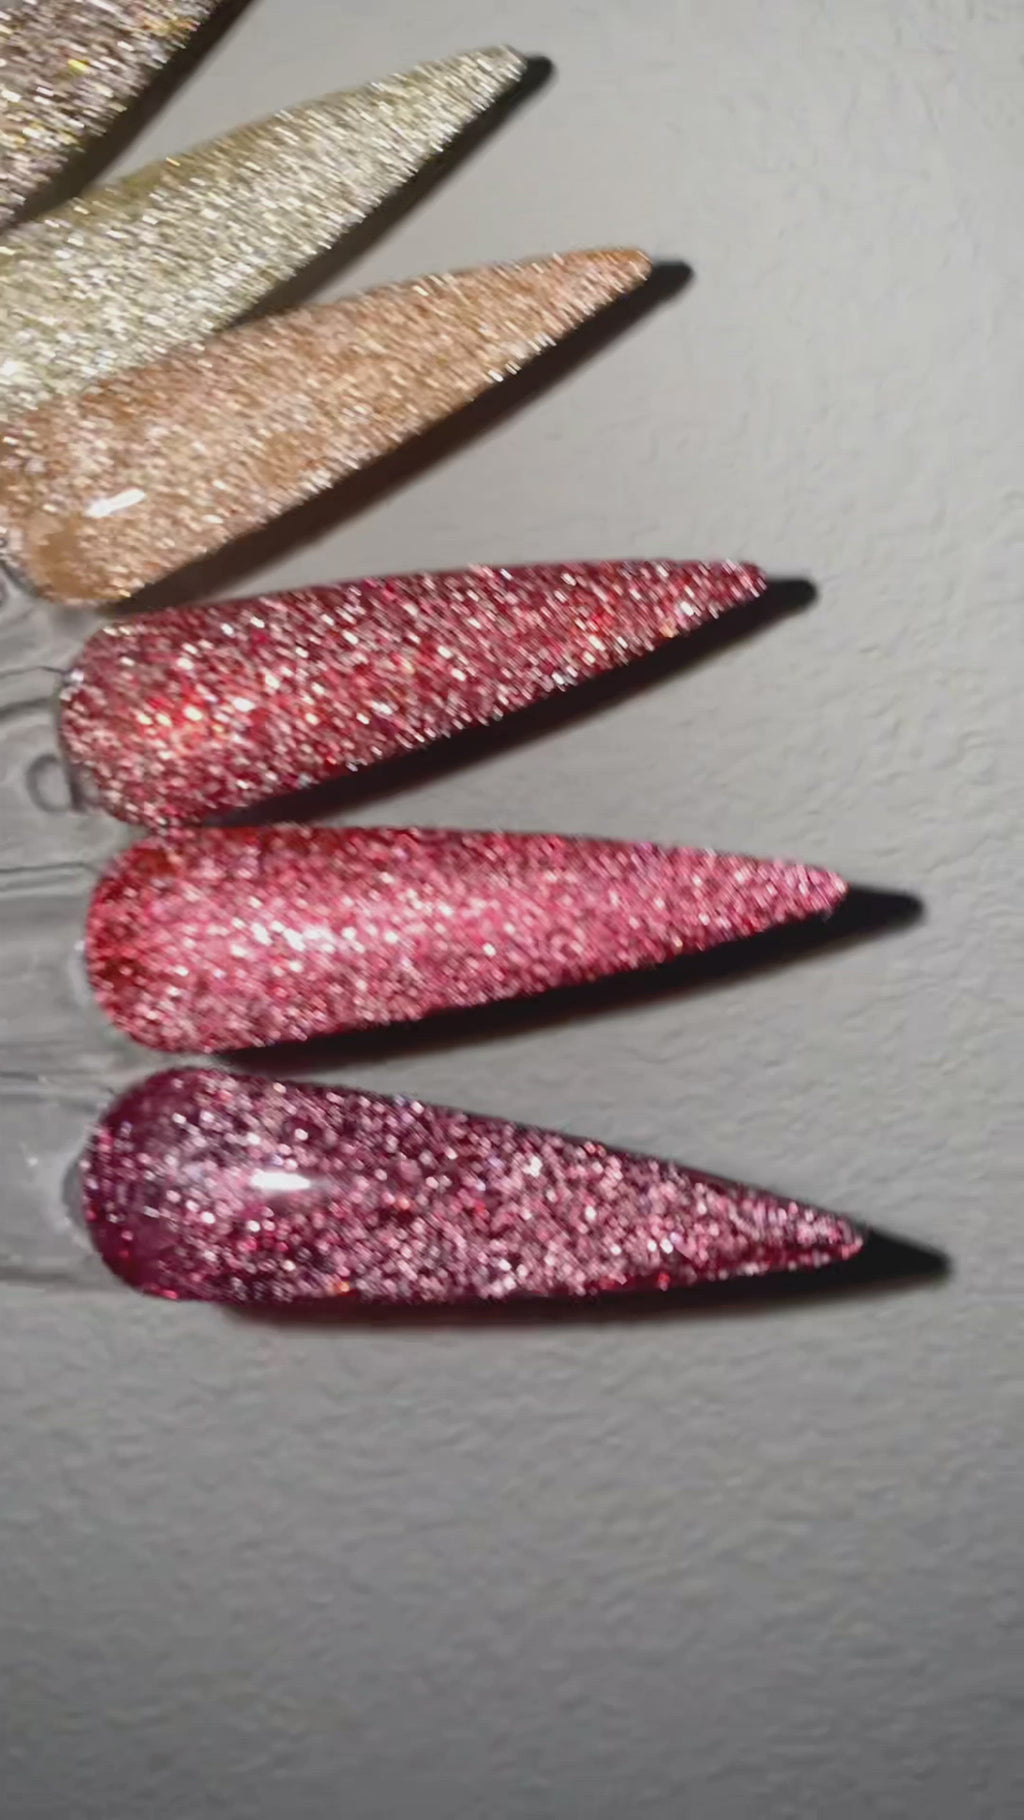 EV Diamond Gel swatch. Video is taken in a dark room with no light, only flash. The set has 18 colors with extremely reflective glitter.